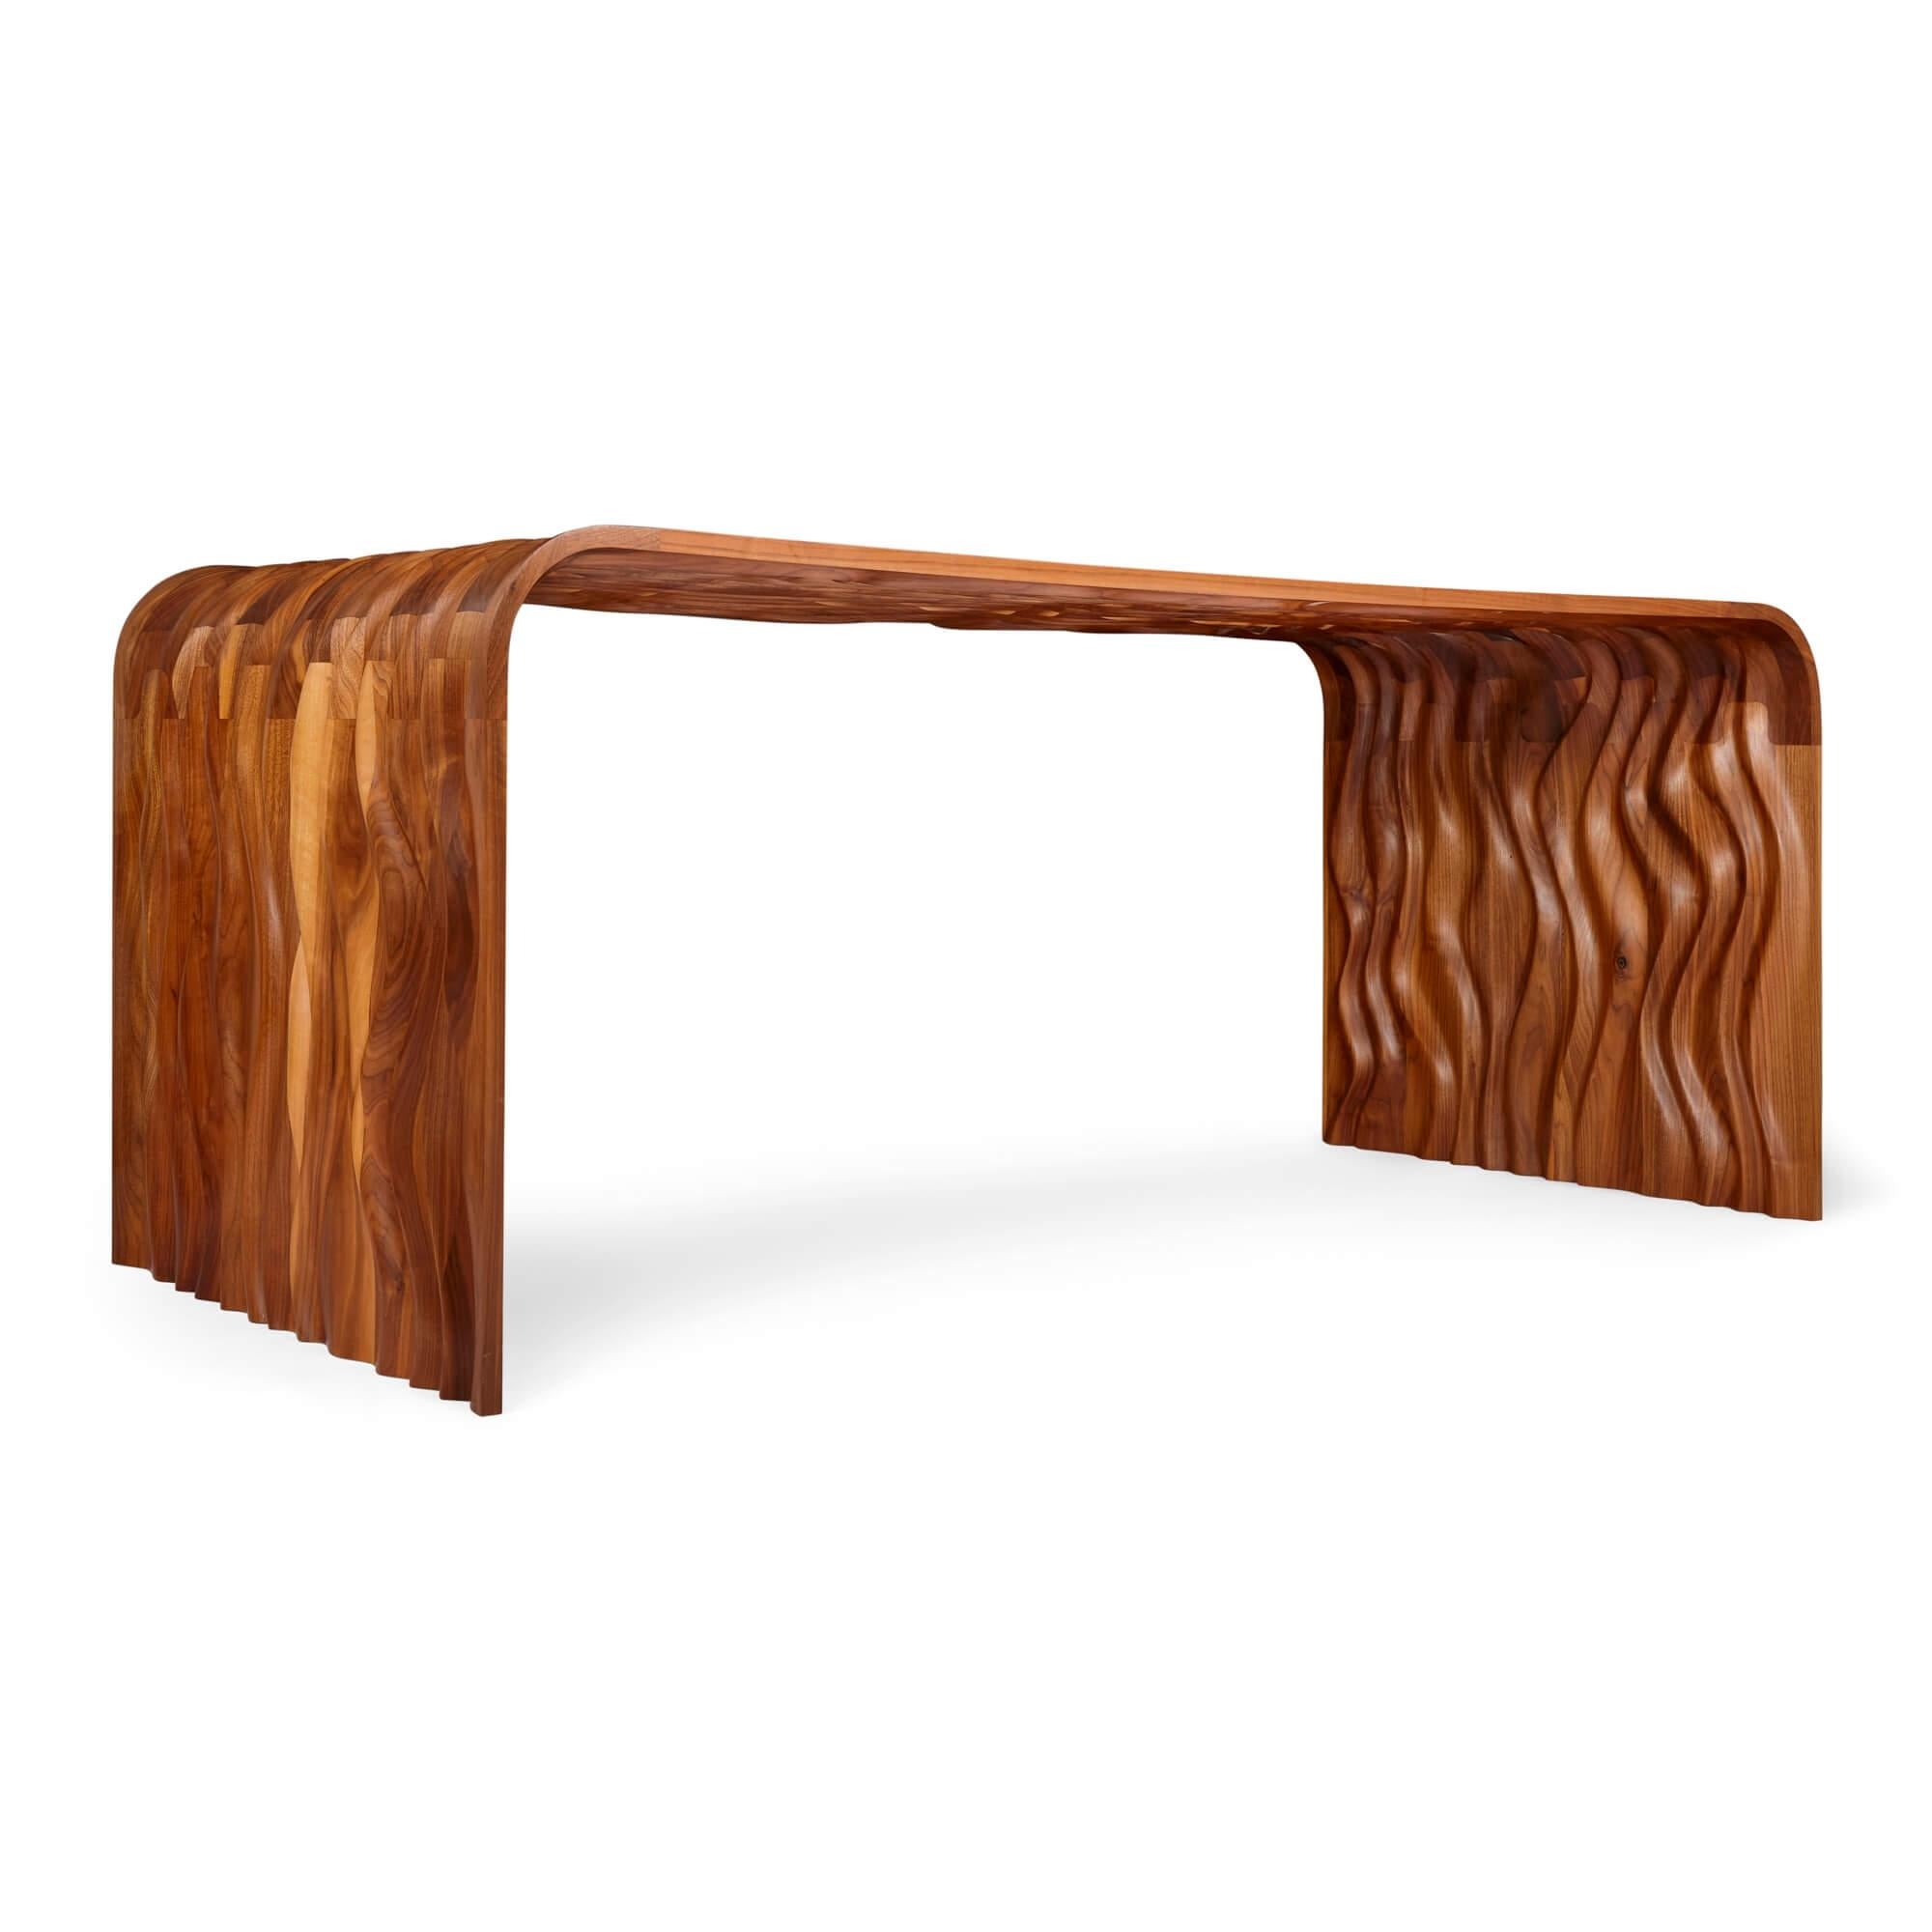 'Ripple' black walnut desk by Tom Vaughan 
British, 21st Century
Height 70.5cm, width 179cm, depth 81.5cm

This intriguing contemporary desk was expertly designed and made by the British designer Tom Vaughan (b. 1976). 

The overall shape of the